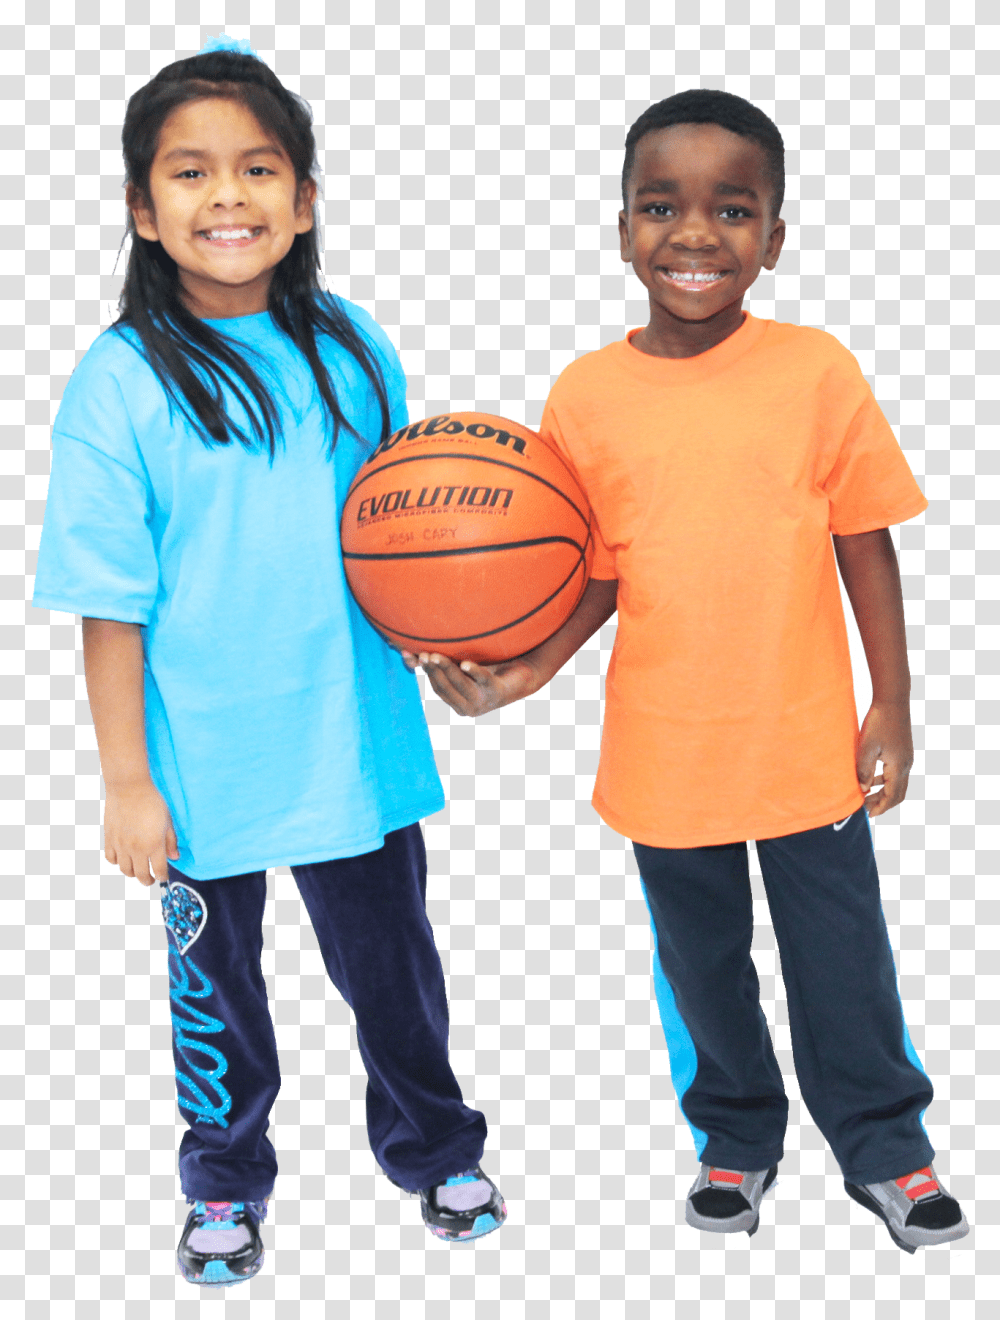 People Sport Image Portable Network Graphics, Person, Human, Sports, Team Sport Transparent Png